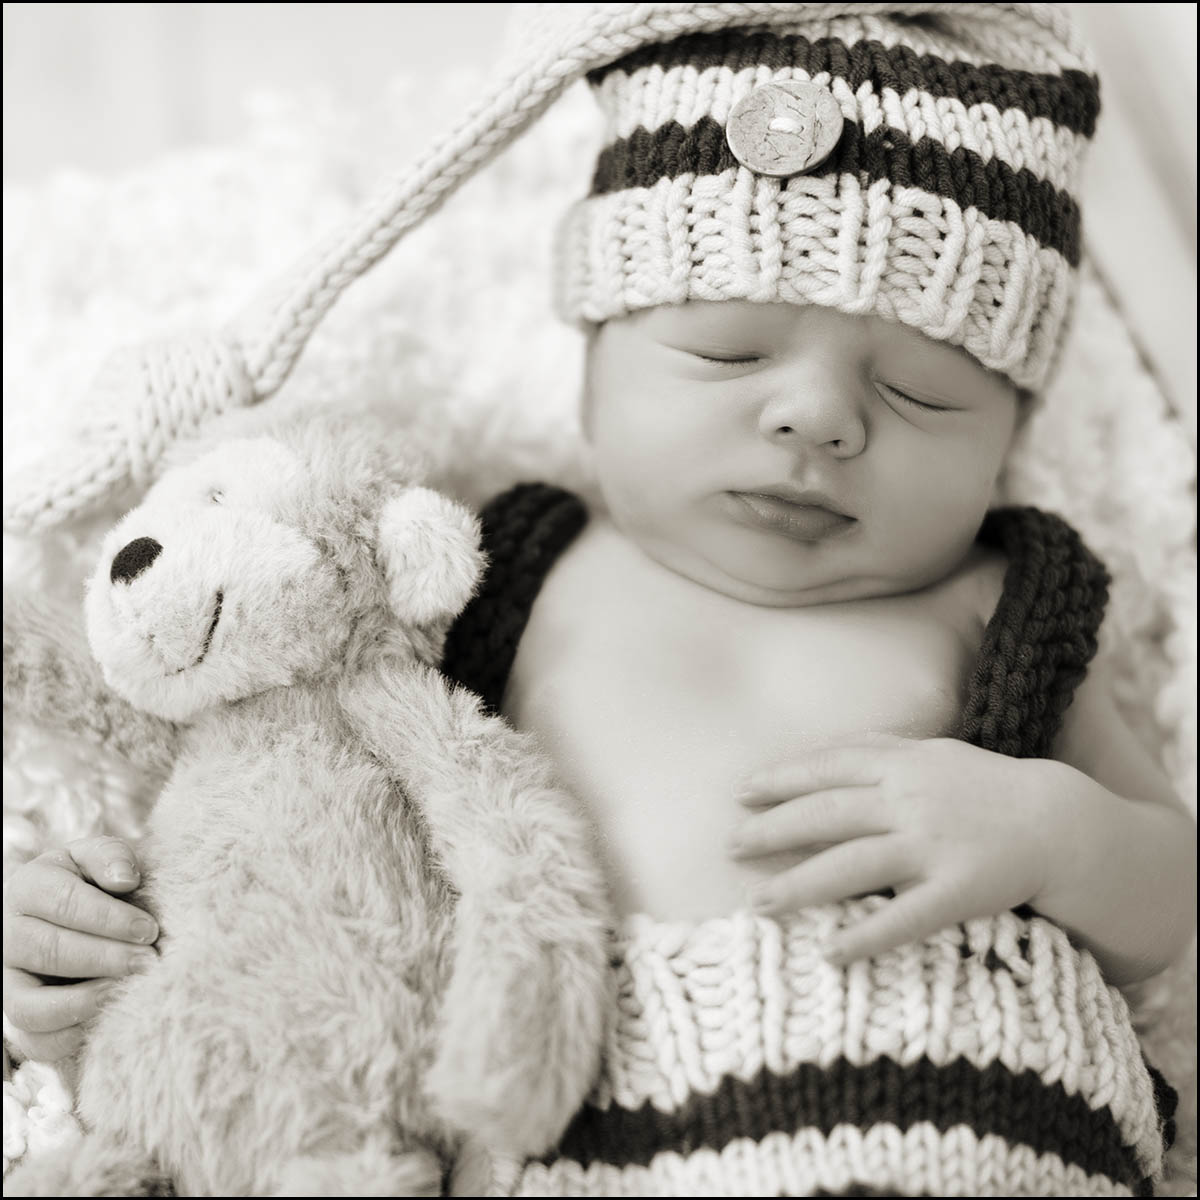 Baby sleeping holding a cuddly toy